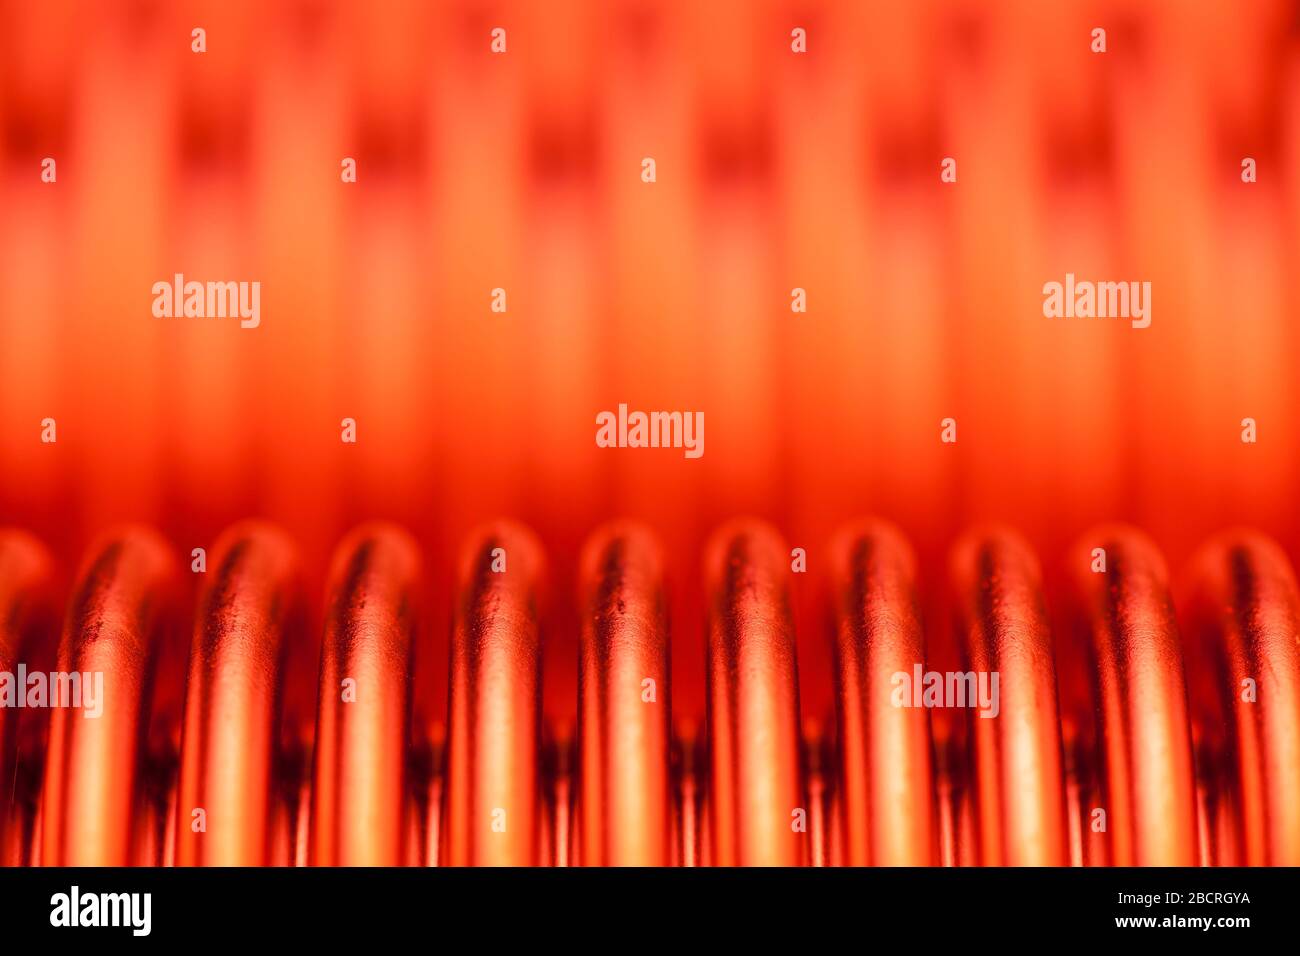 Detail of a hot heat exchanger or recuperator in orange red - selective focus Stock Photo